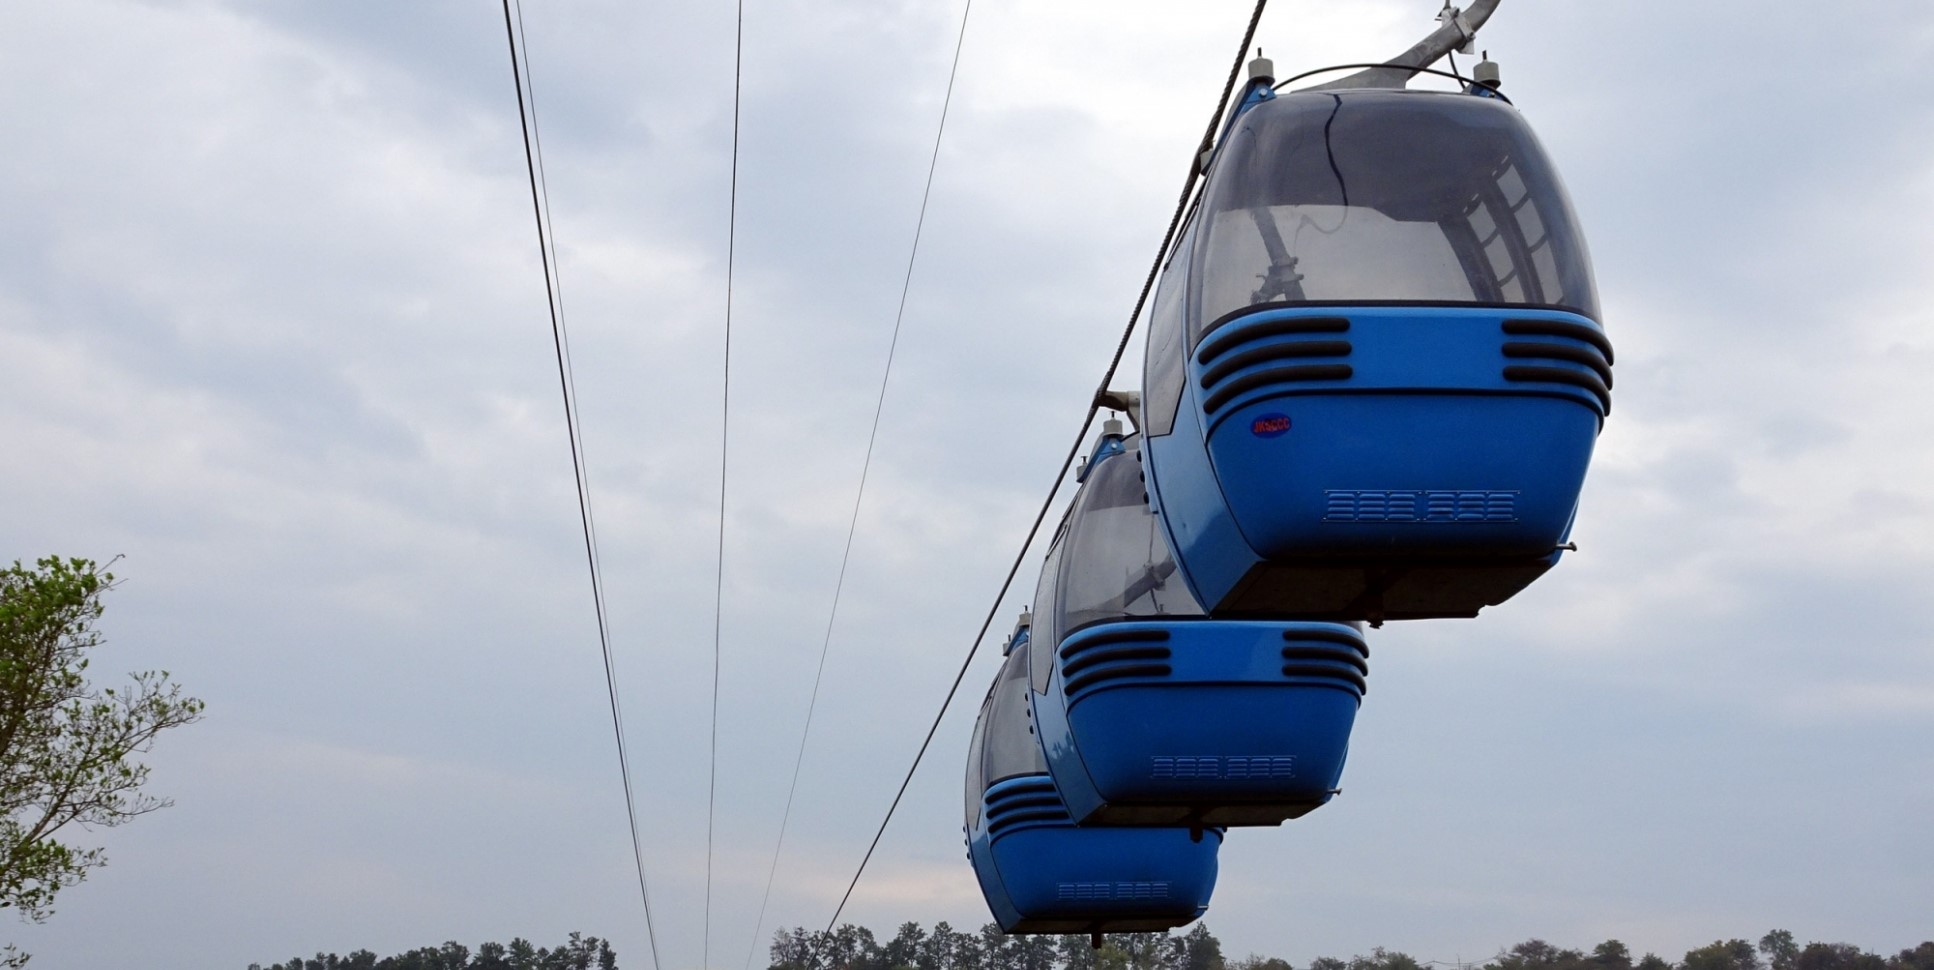 Cable car accident in Turkiye sends 1 passenger plummeting to his death and injures 7